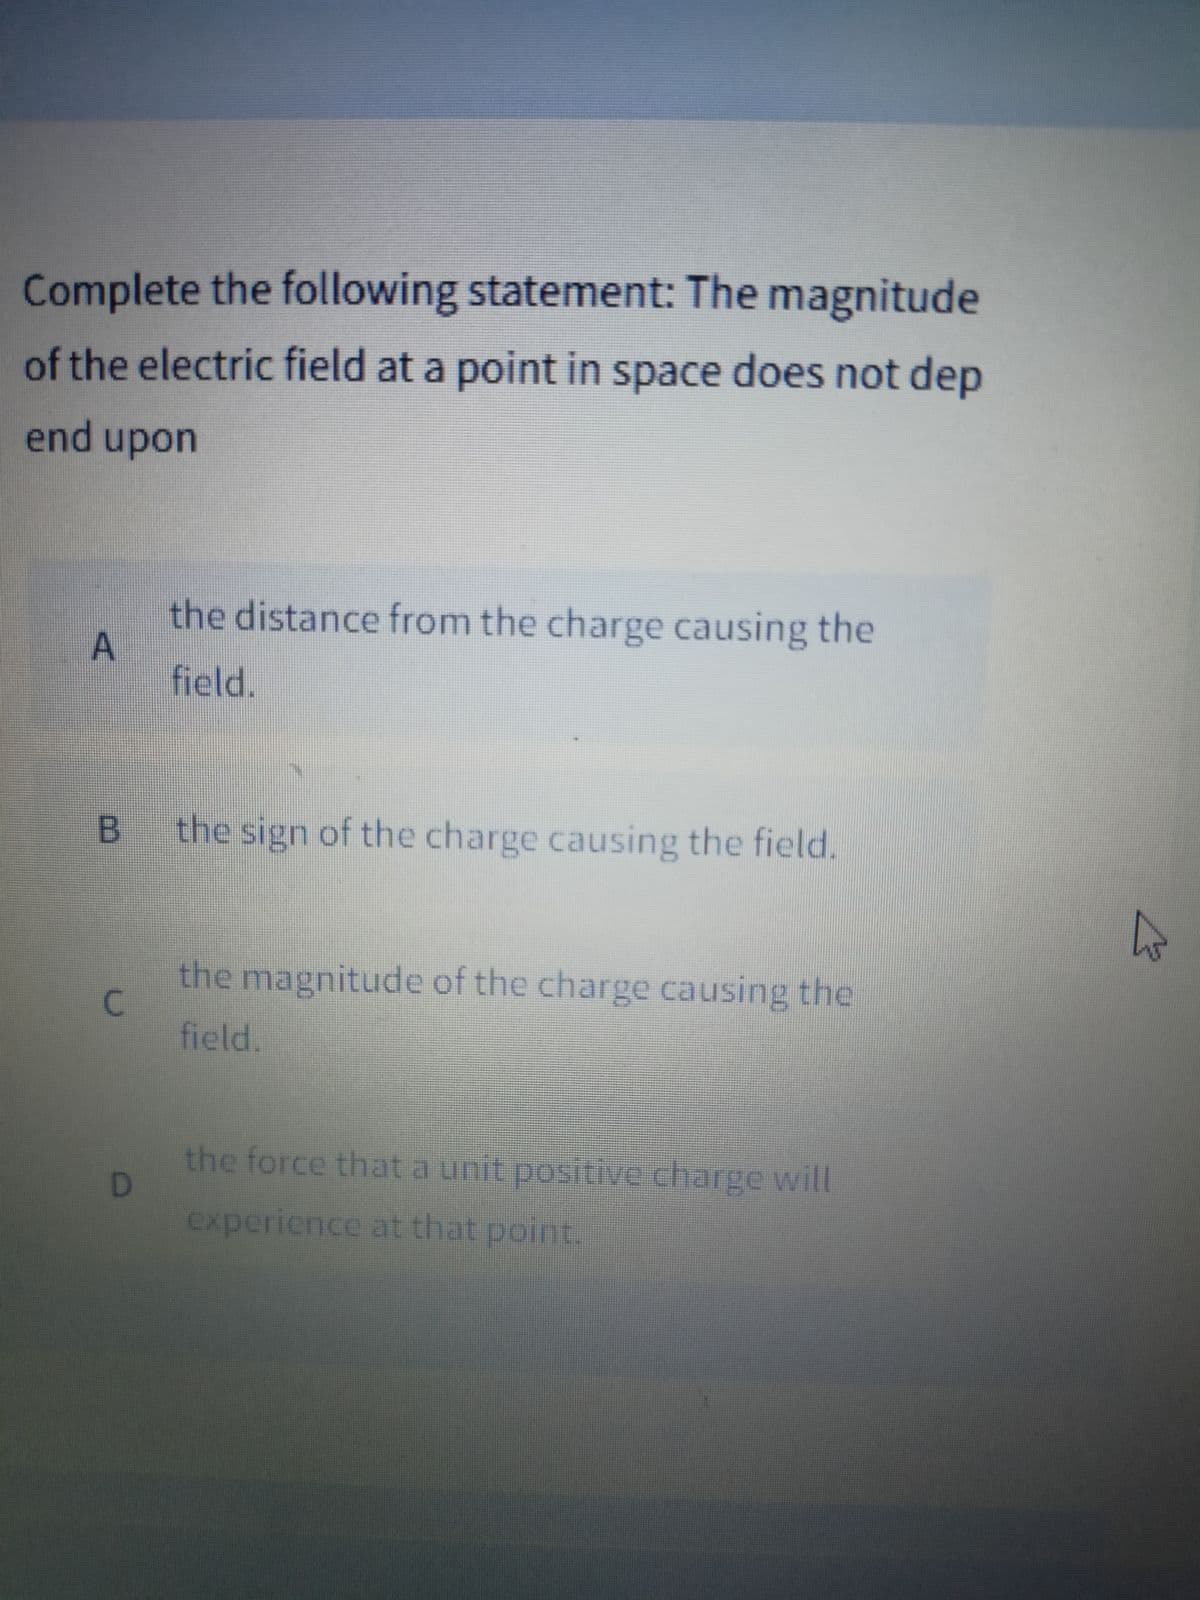 Complete the following statement: The magnitude
of the electric field at a point in space does not dep
end upon
the distance from the charge causing the
A
field.
the sign of the charge causing the field.
the magnitude of the charge causing the
C.
field.
the force that a unit positive charge will
experience at that point.
B.
